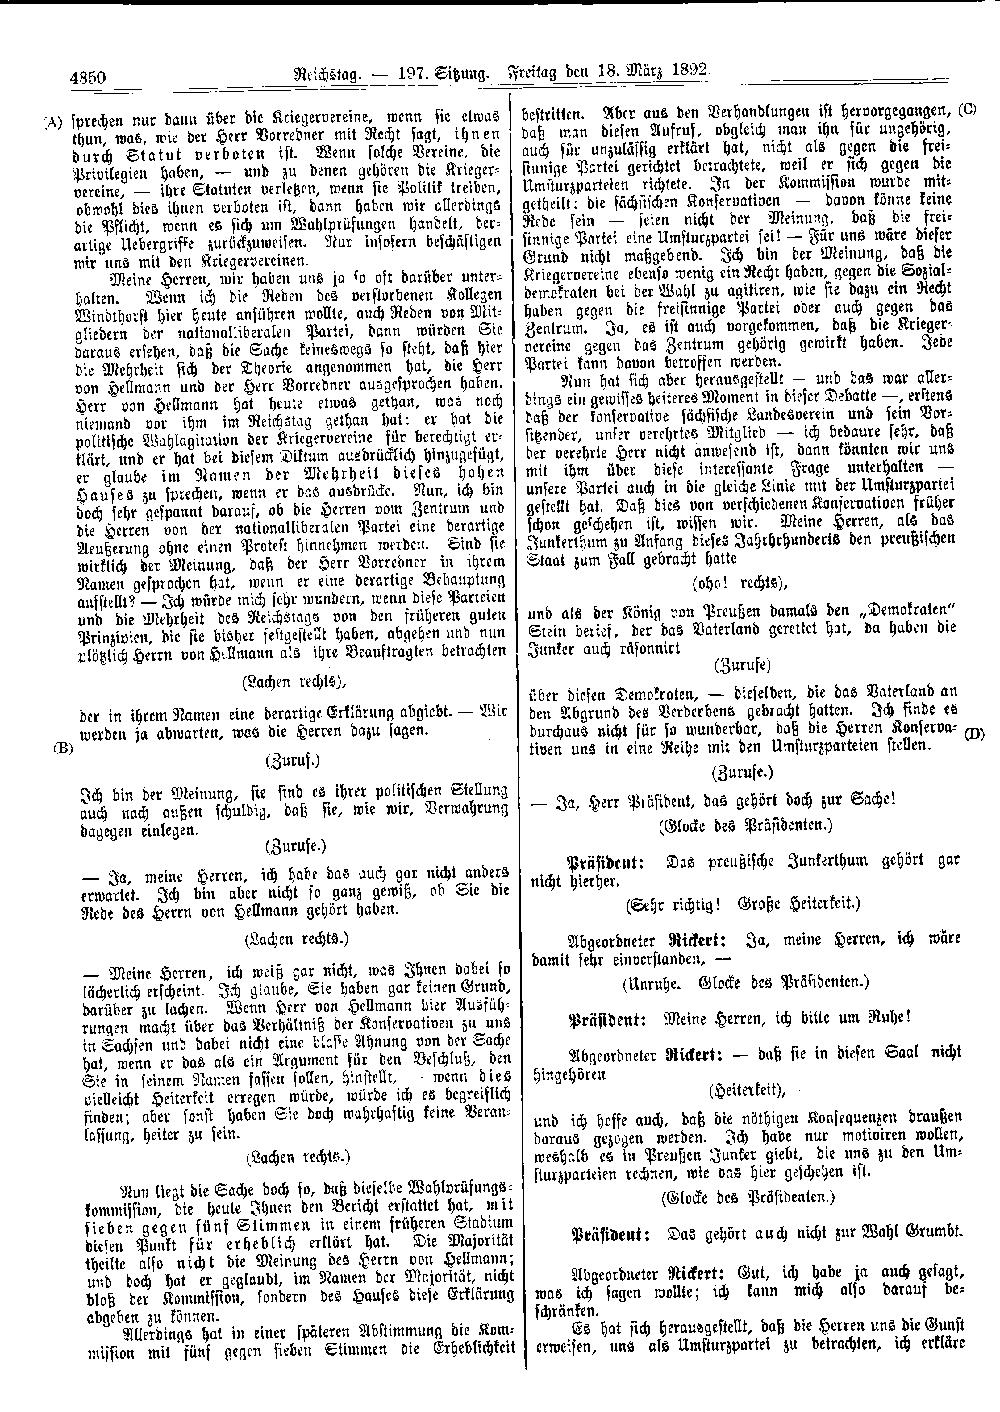 Scan of page 4850